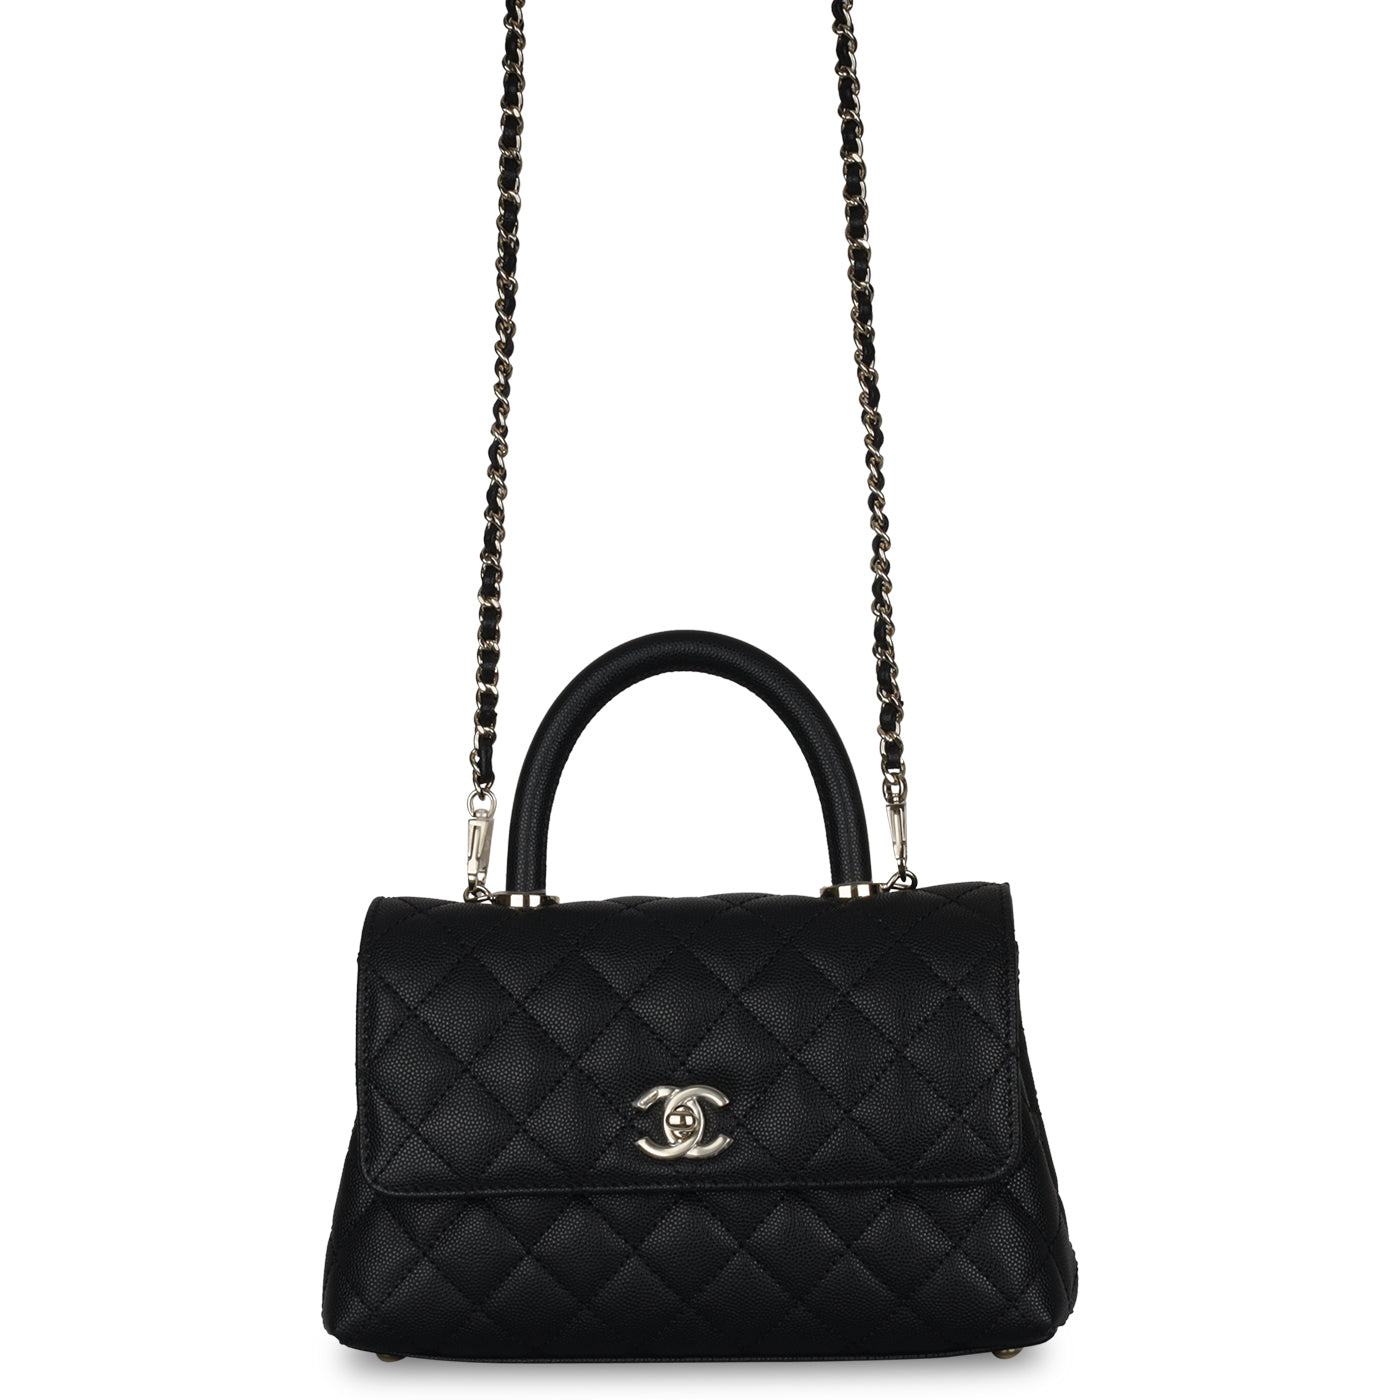 Chanel Light Blue Iridescent Quilted Caviar Small Coco Top Handle